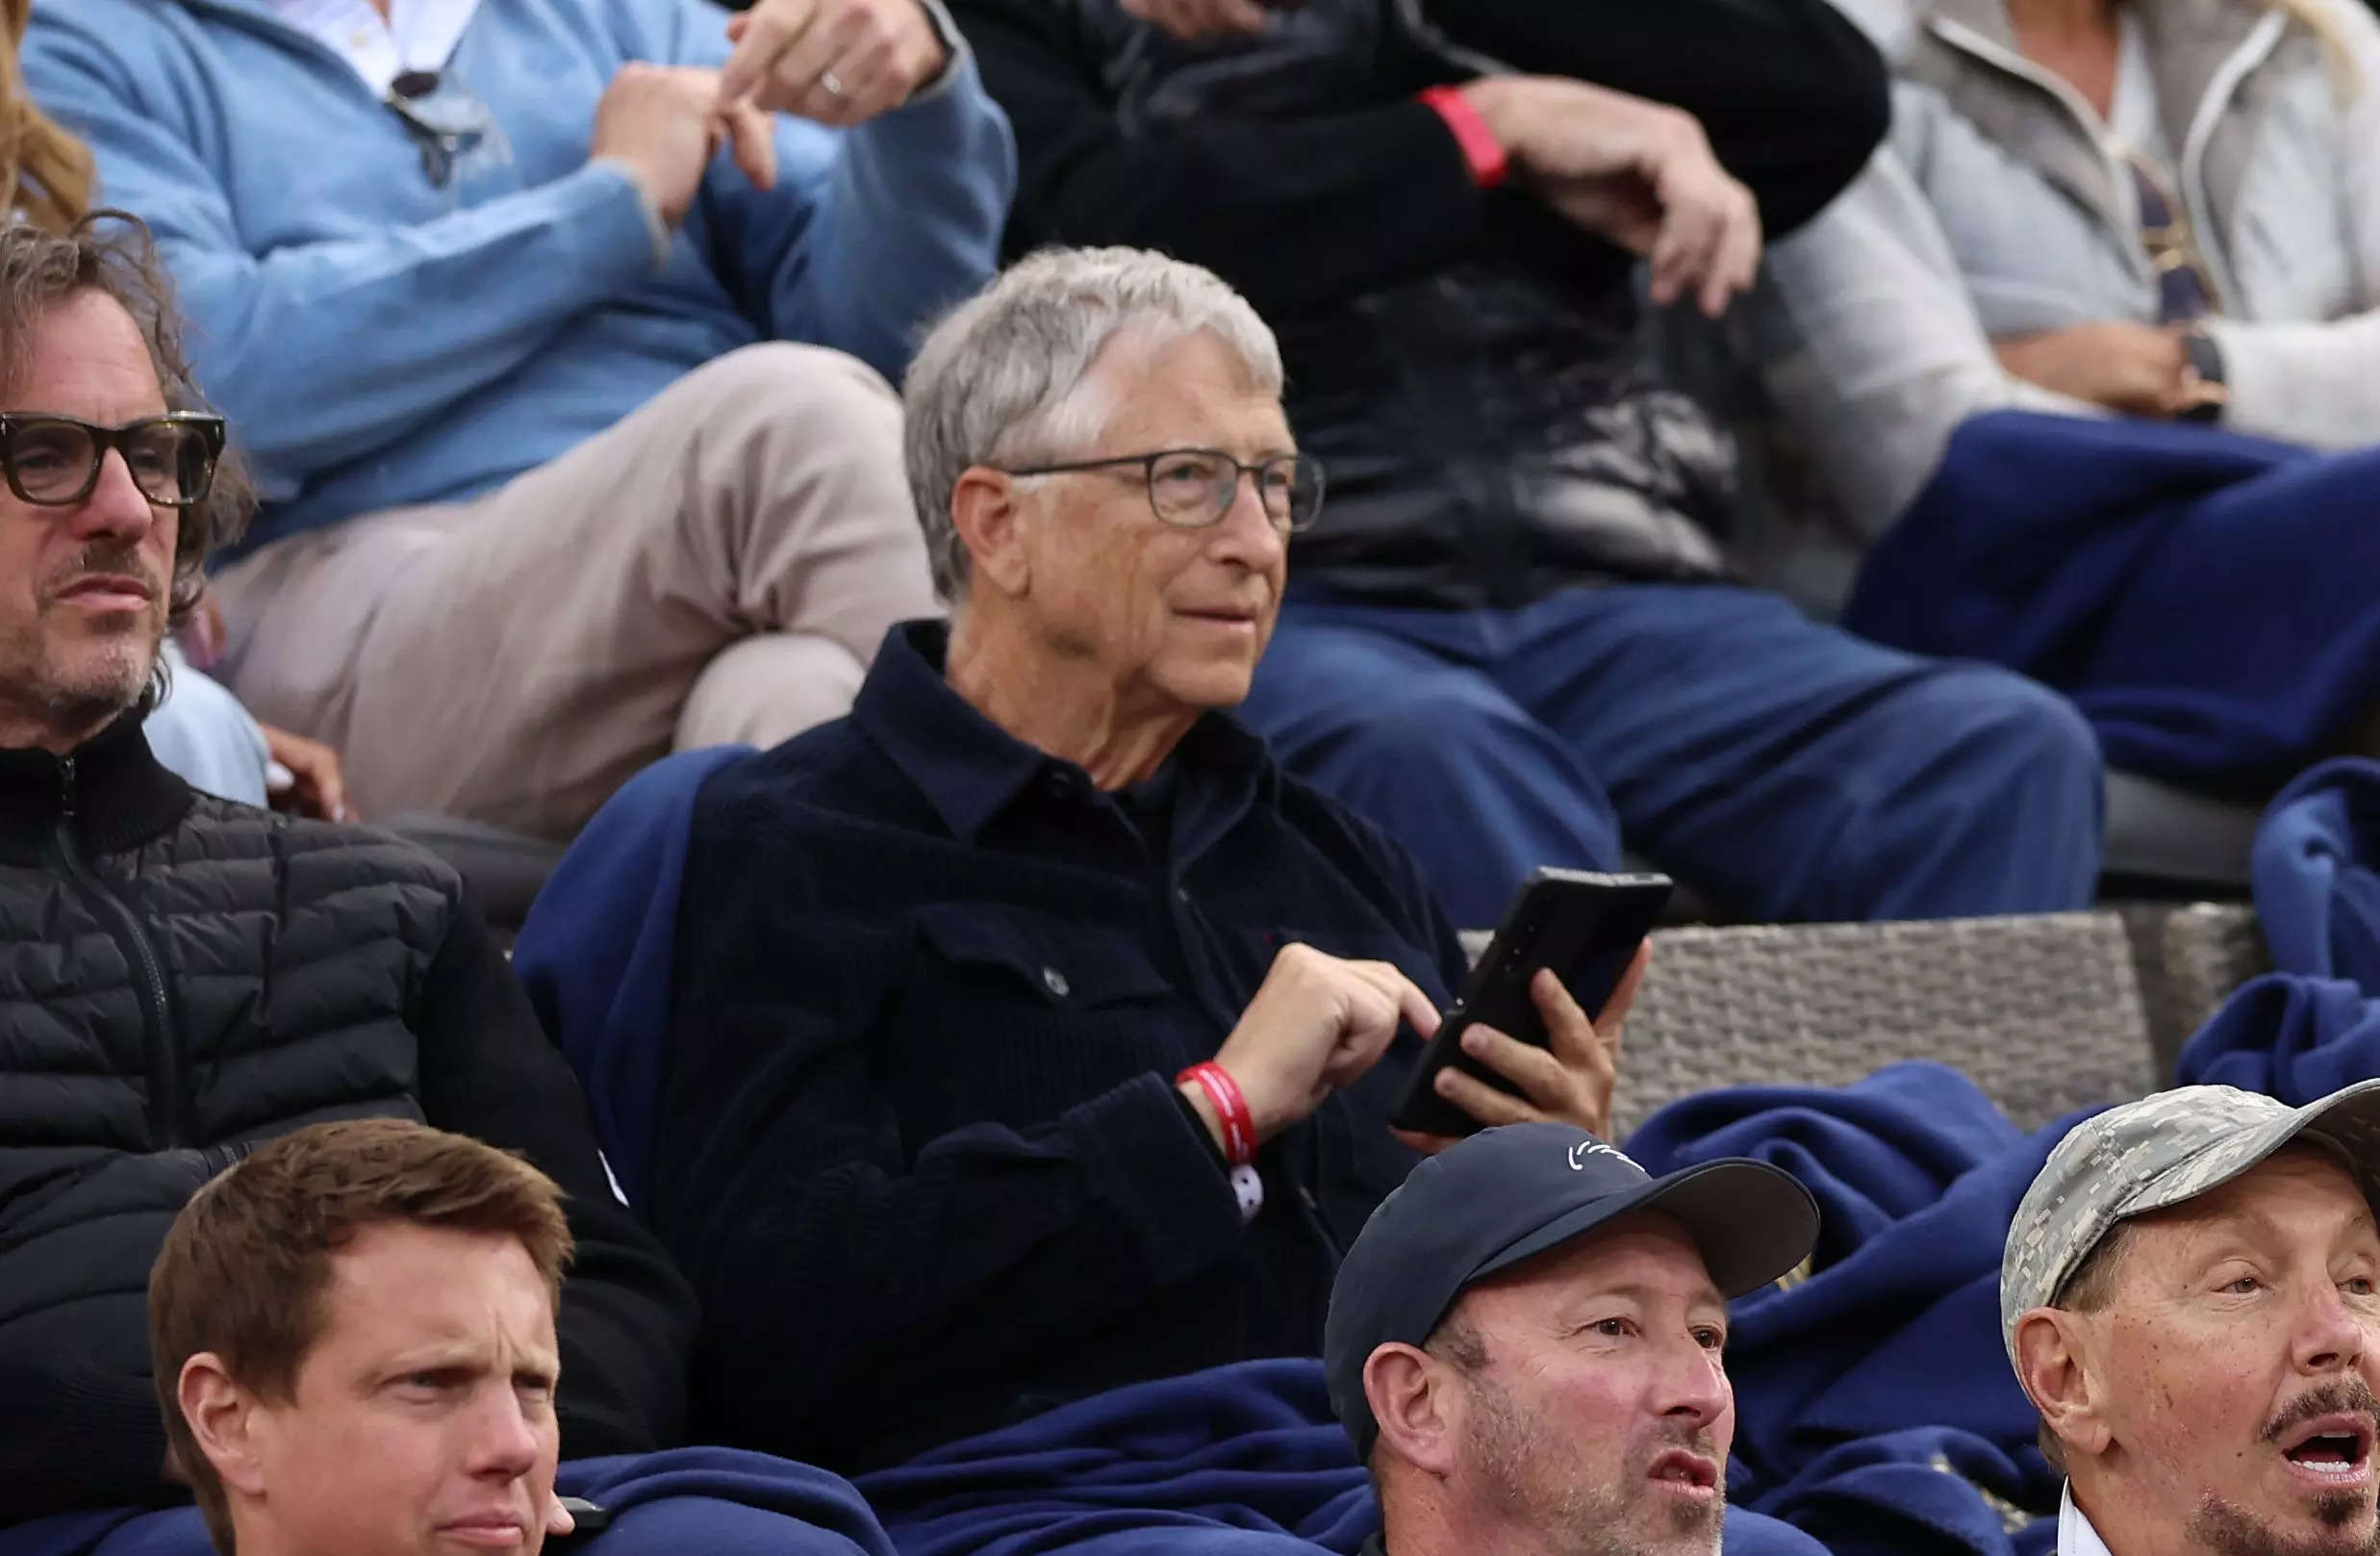 Bill Gates and Larry Ellison sitting in a crowd